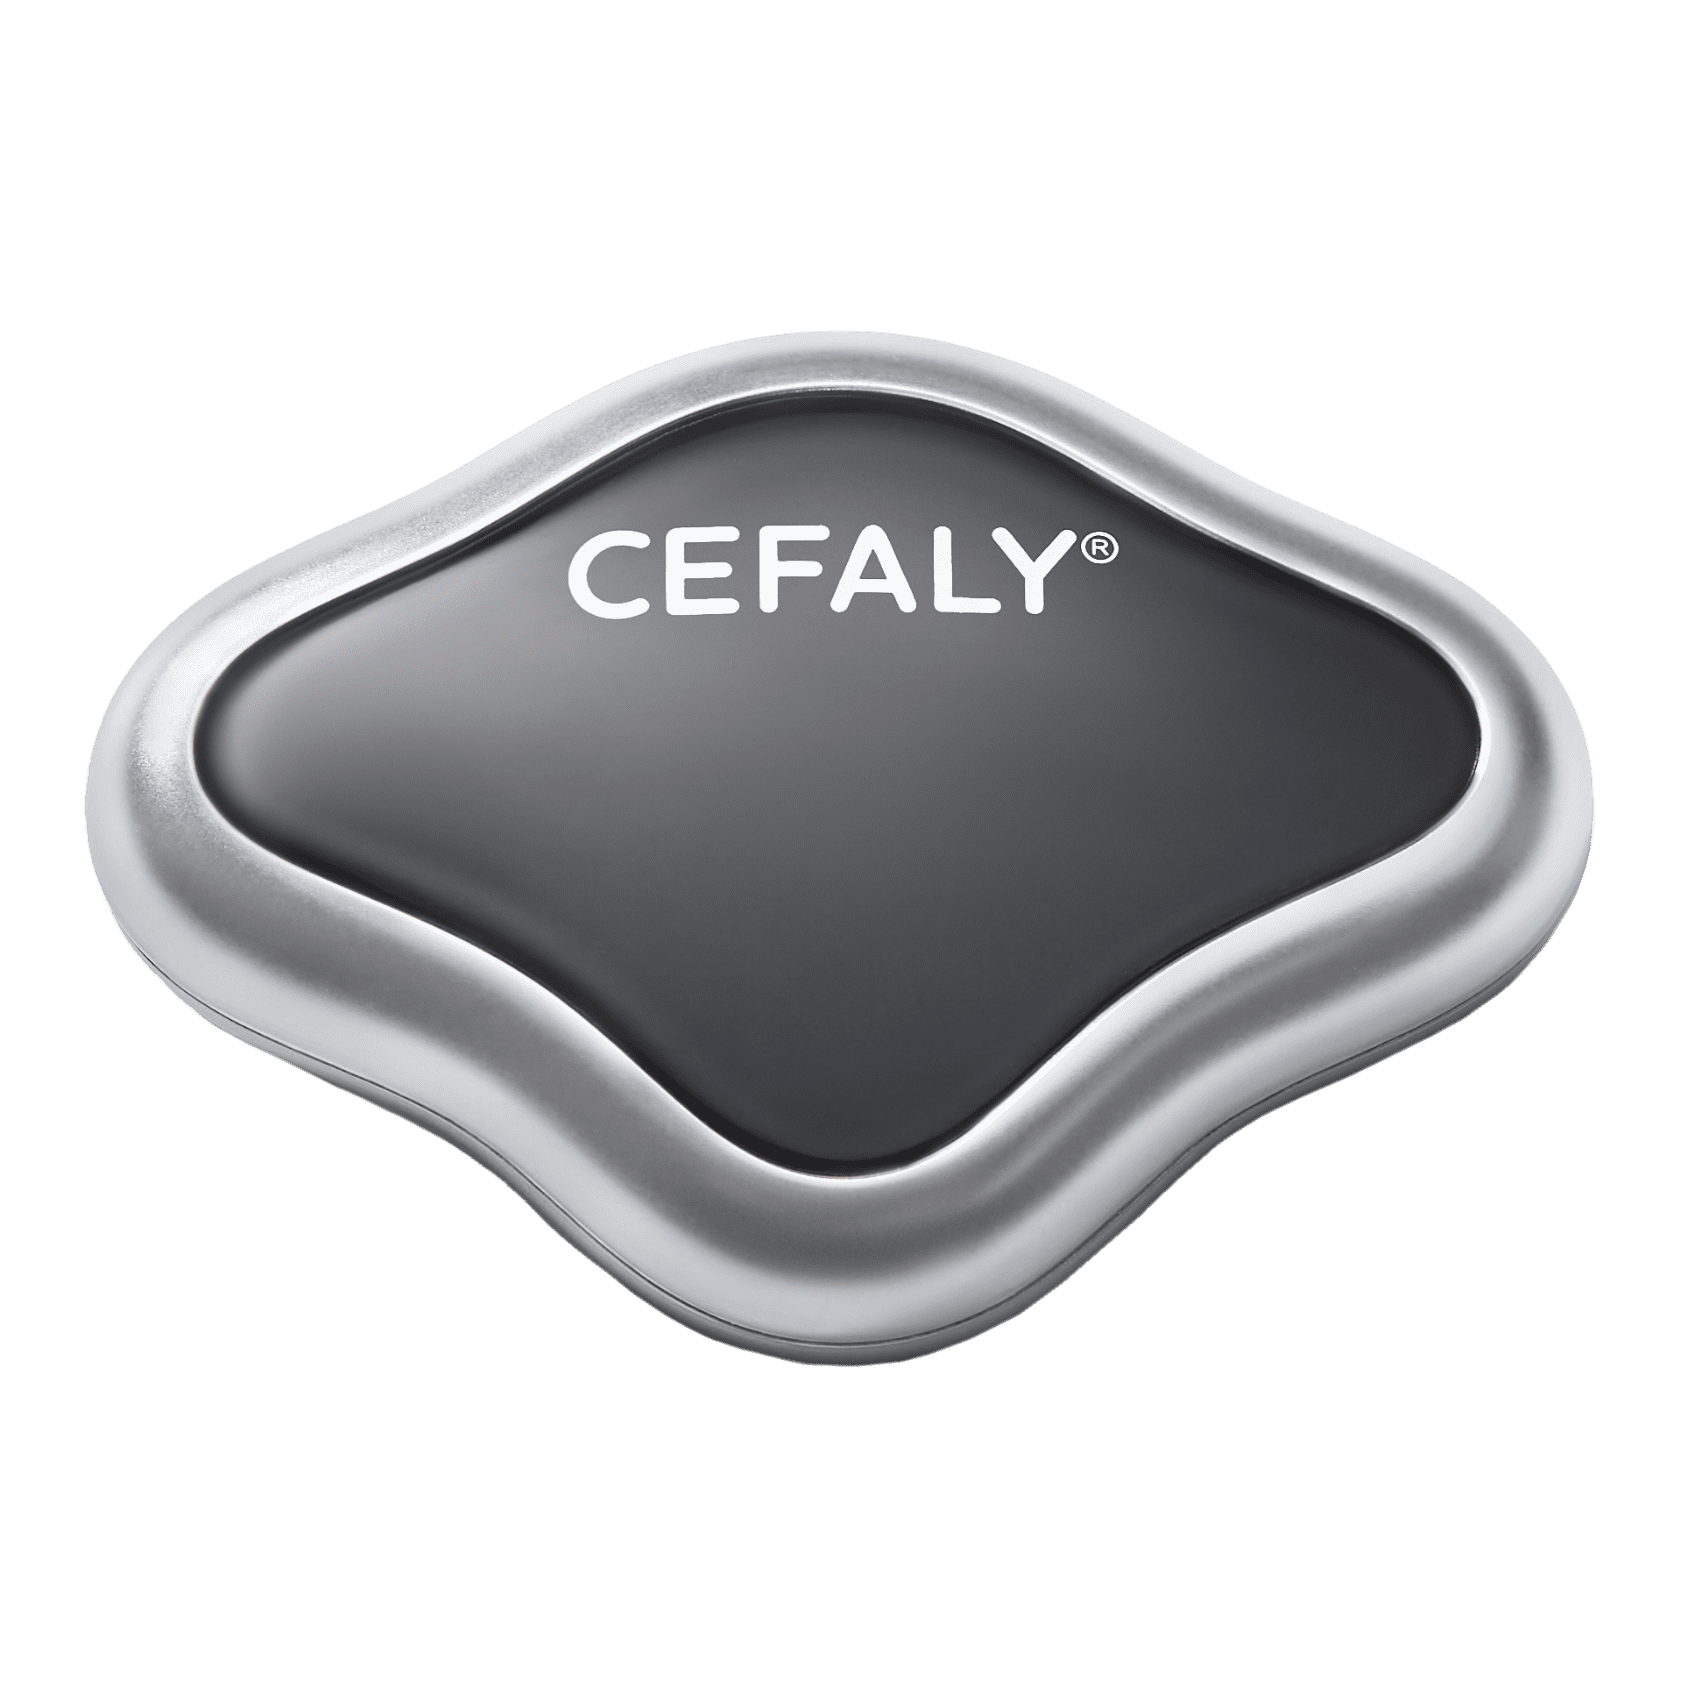 how does the CEFALY device work